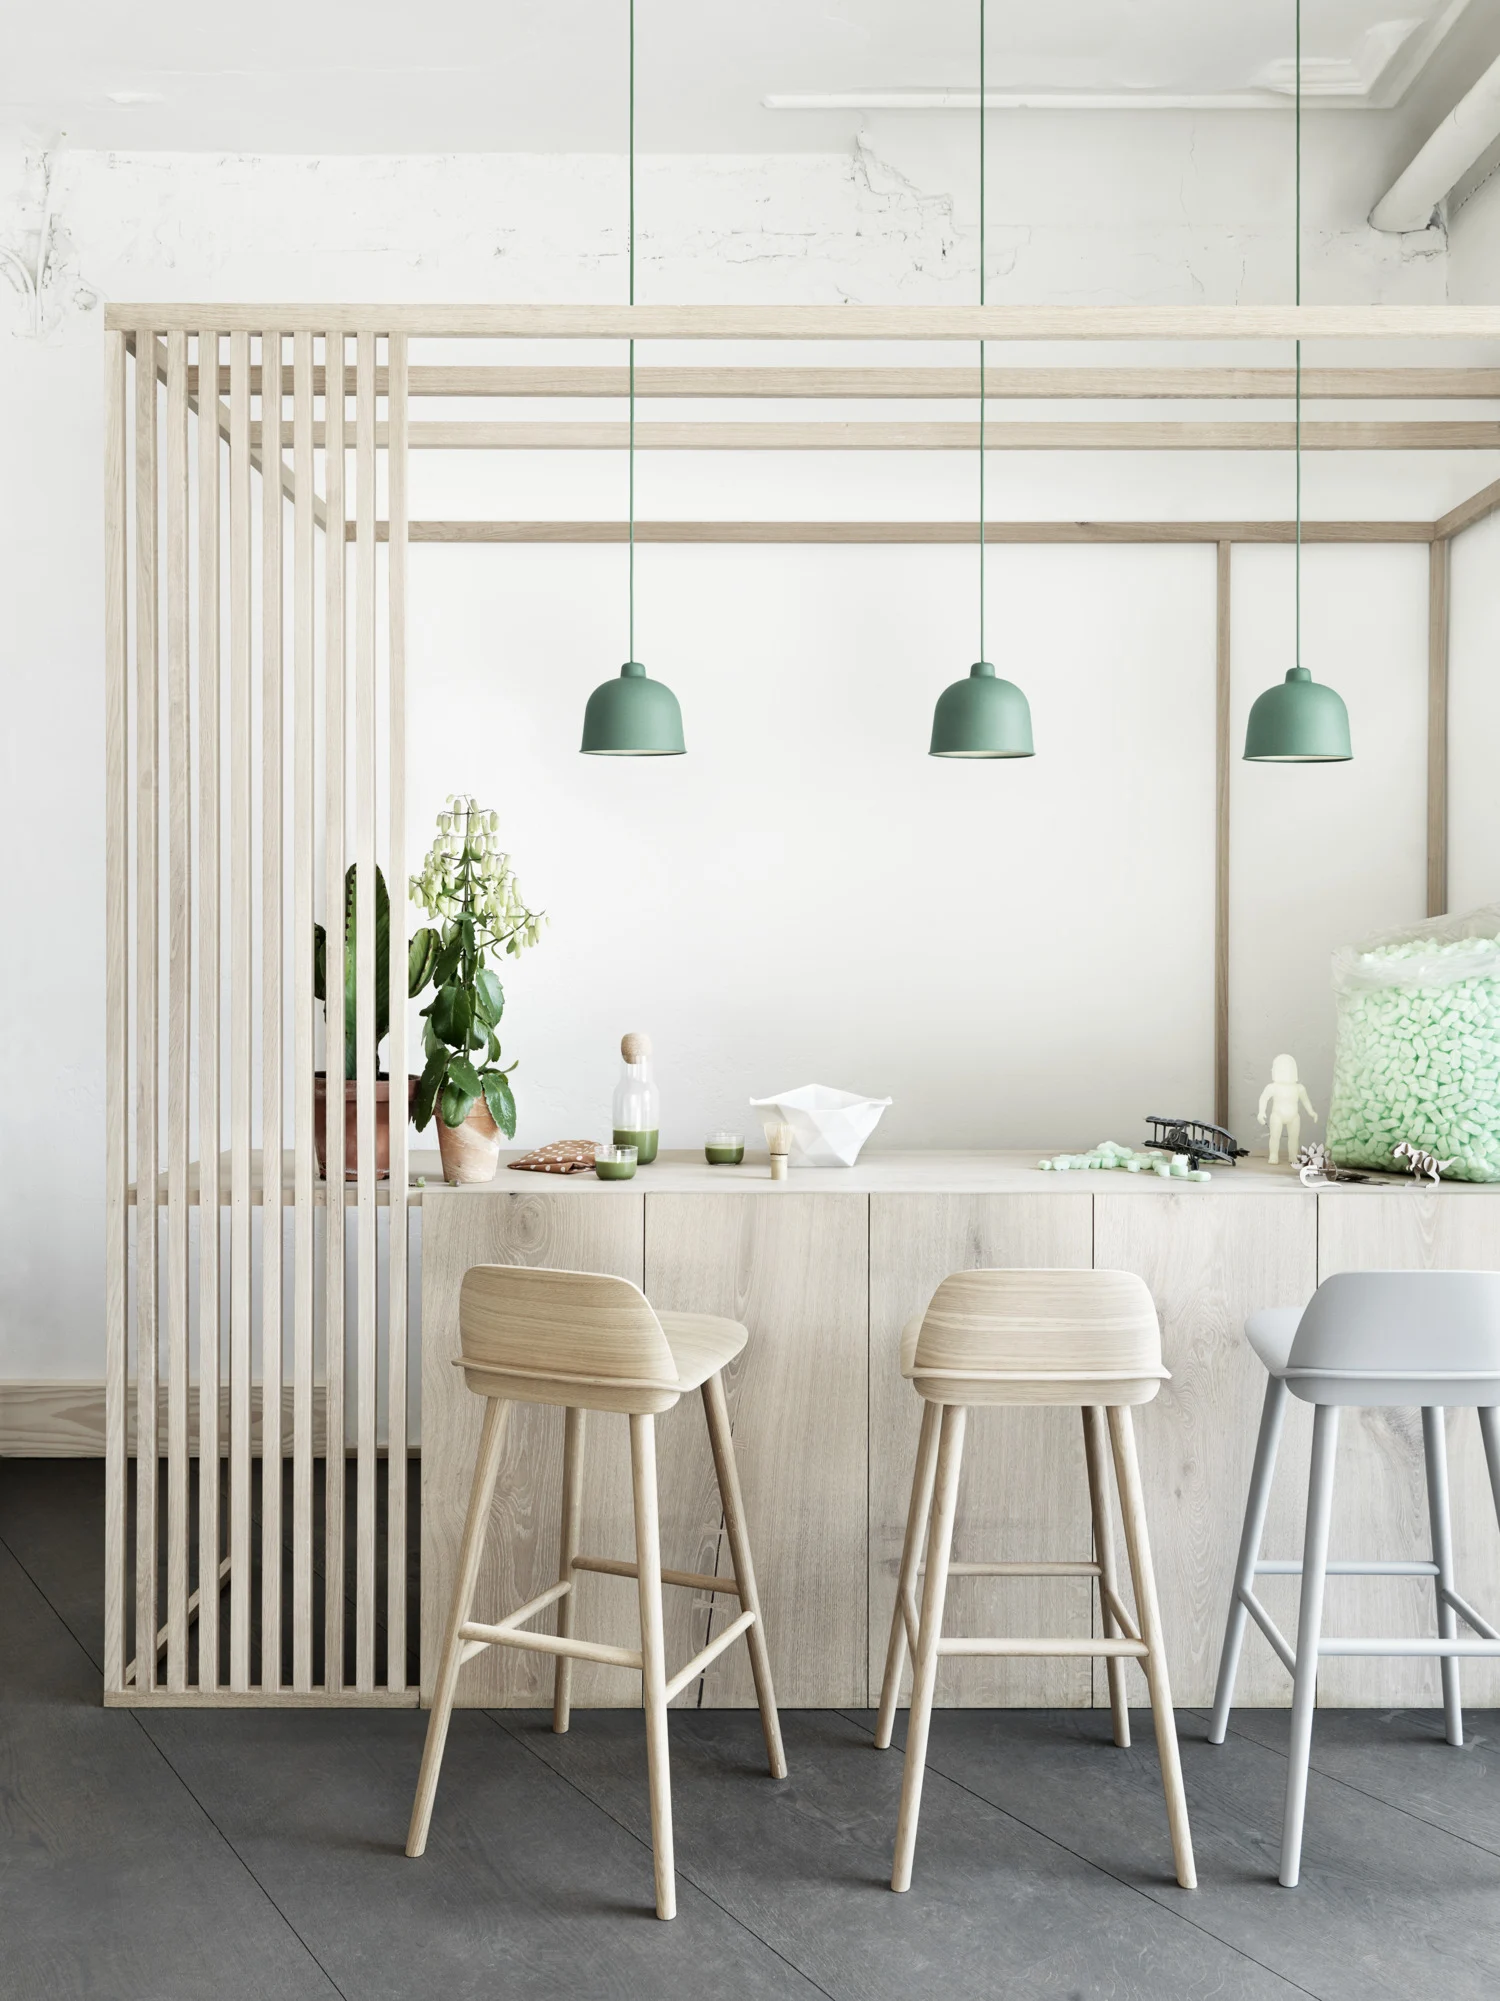 A minimalist kitchen interior featuring a wooden partition with vertical slats, complemented by a light wooden countertop. Above the counter hang three pastel green pendant lights in a row.